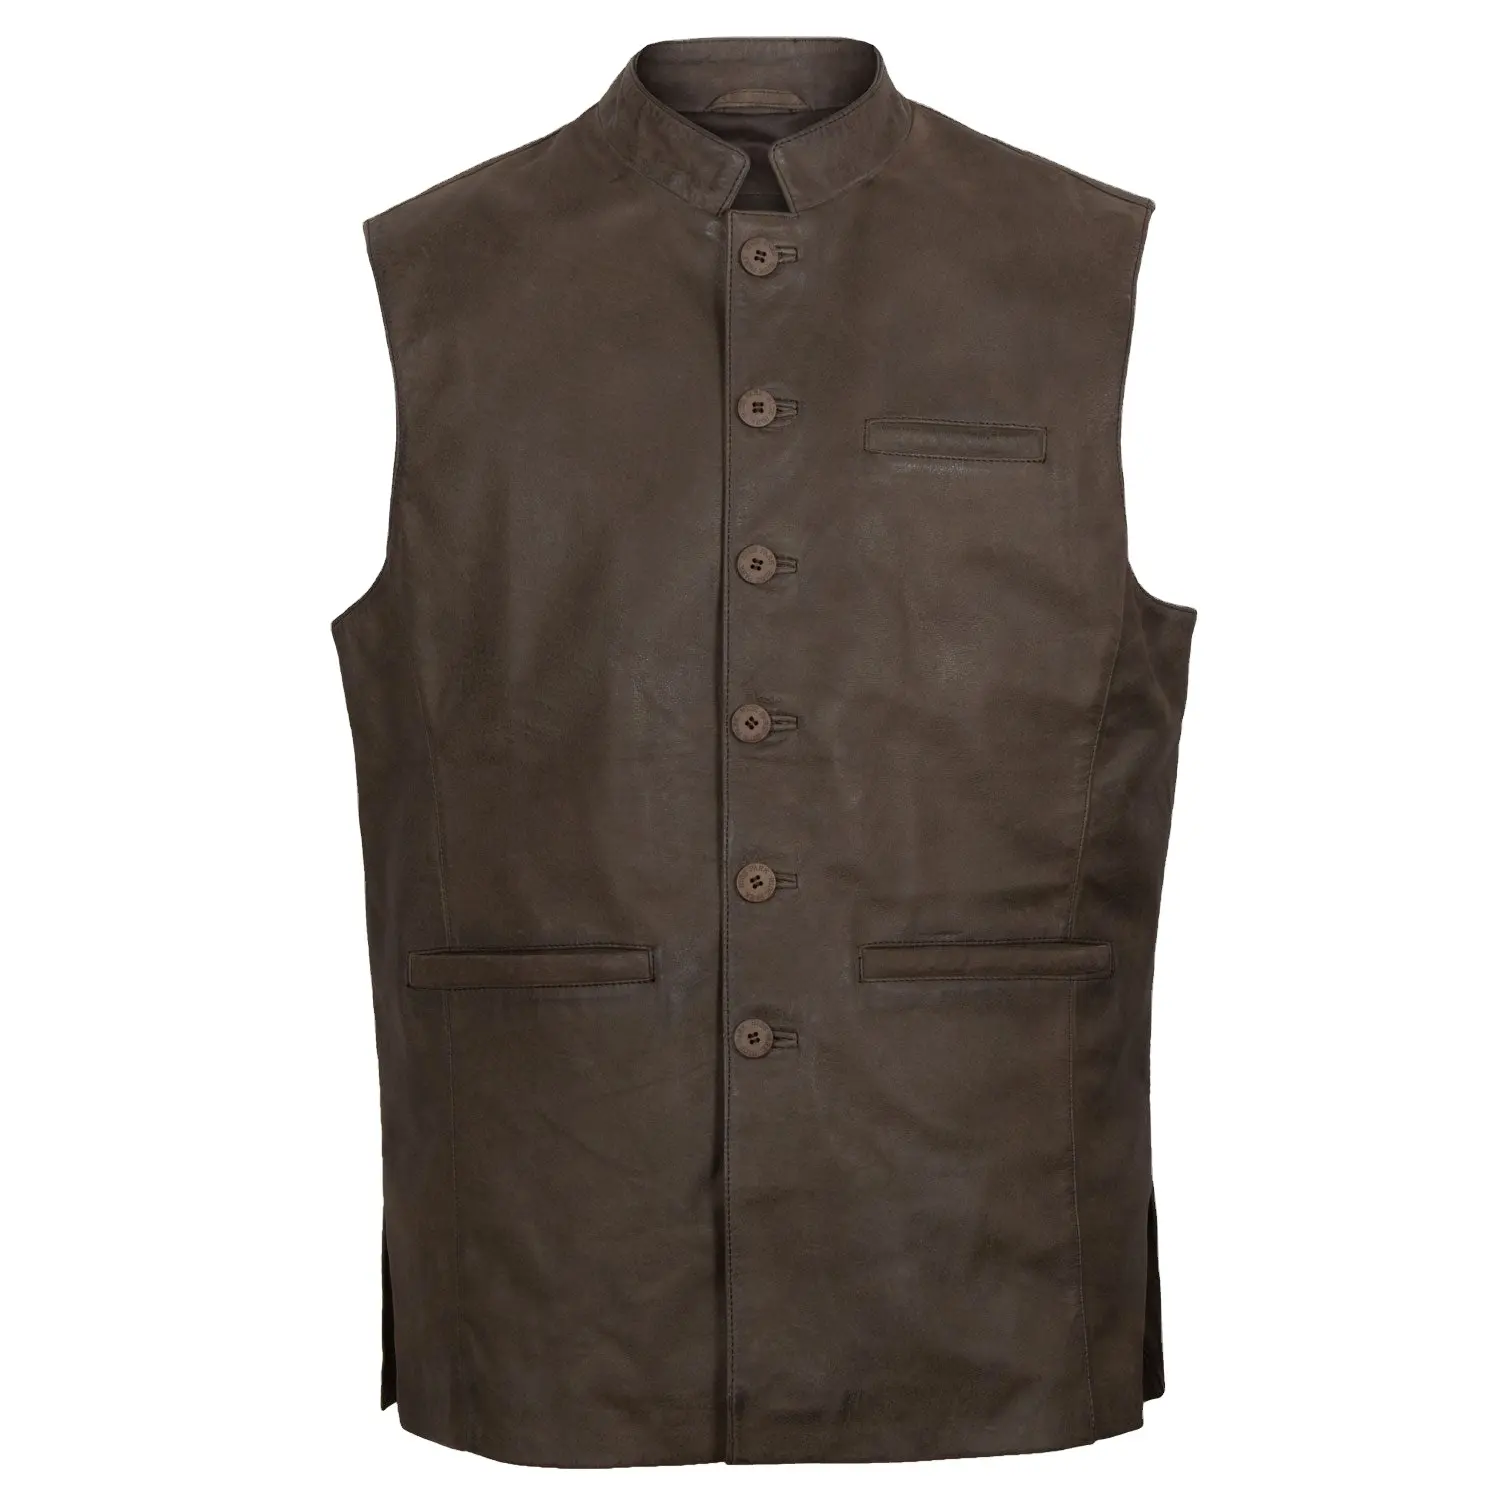 Men's Leather Jerkin Vest Classic Brown Vest with Button Detail and Cotton-Lined Pockets Leather Waistcoats For Men